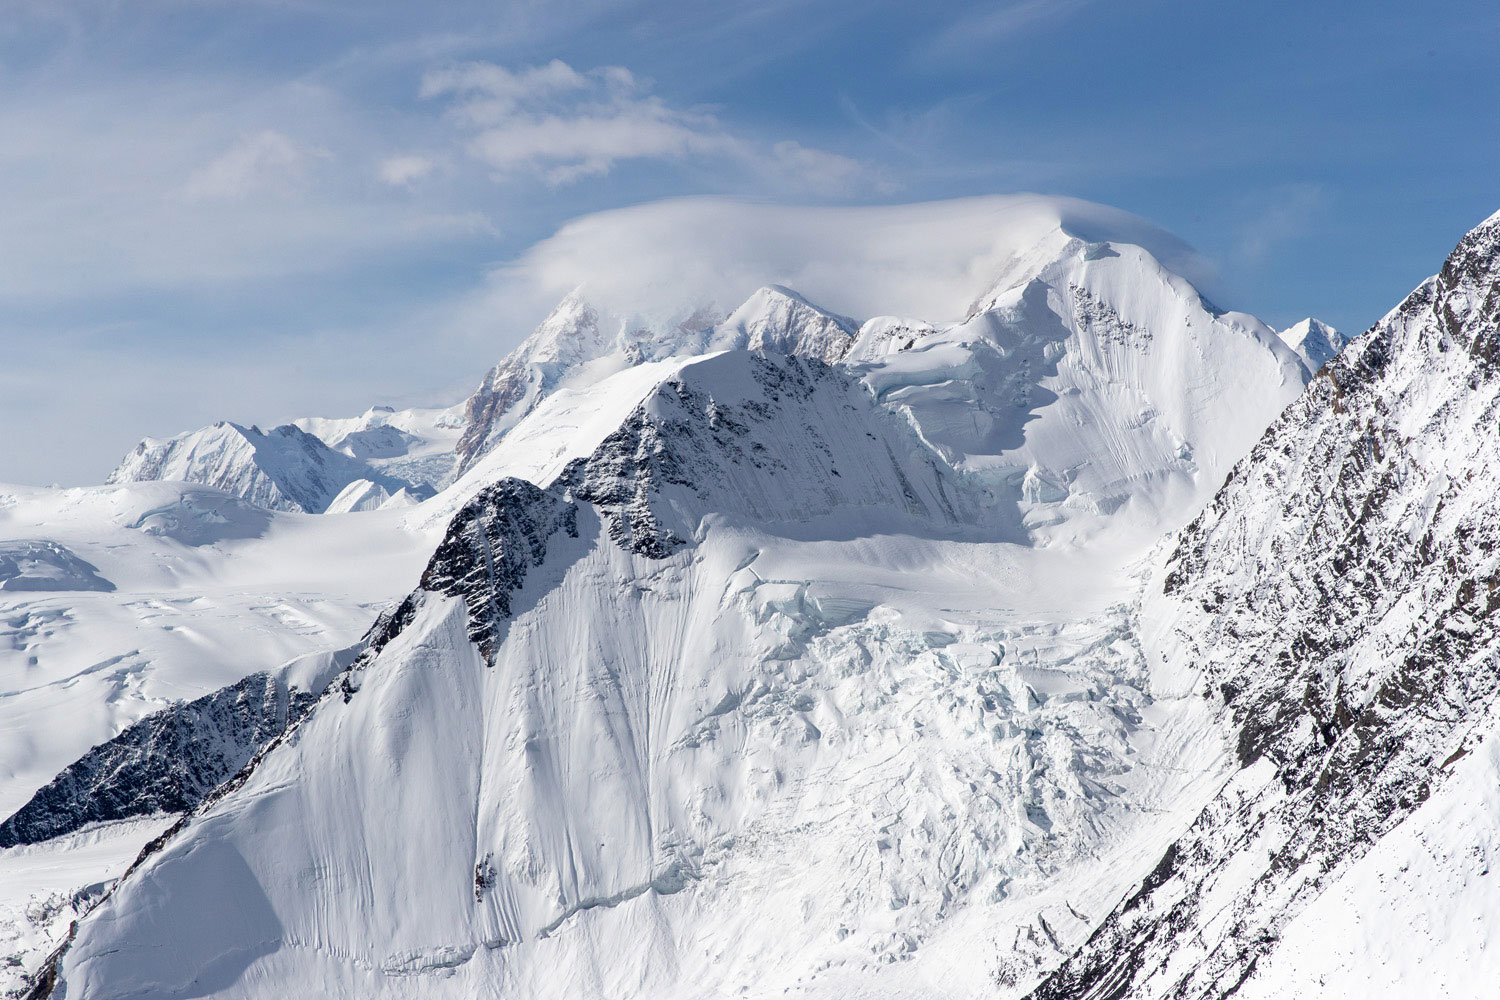 The high ridges guarding Denali's peaks are buried deep in snow